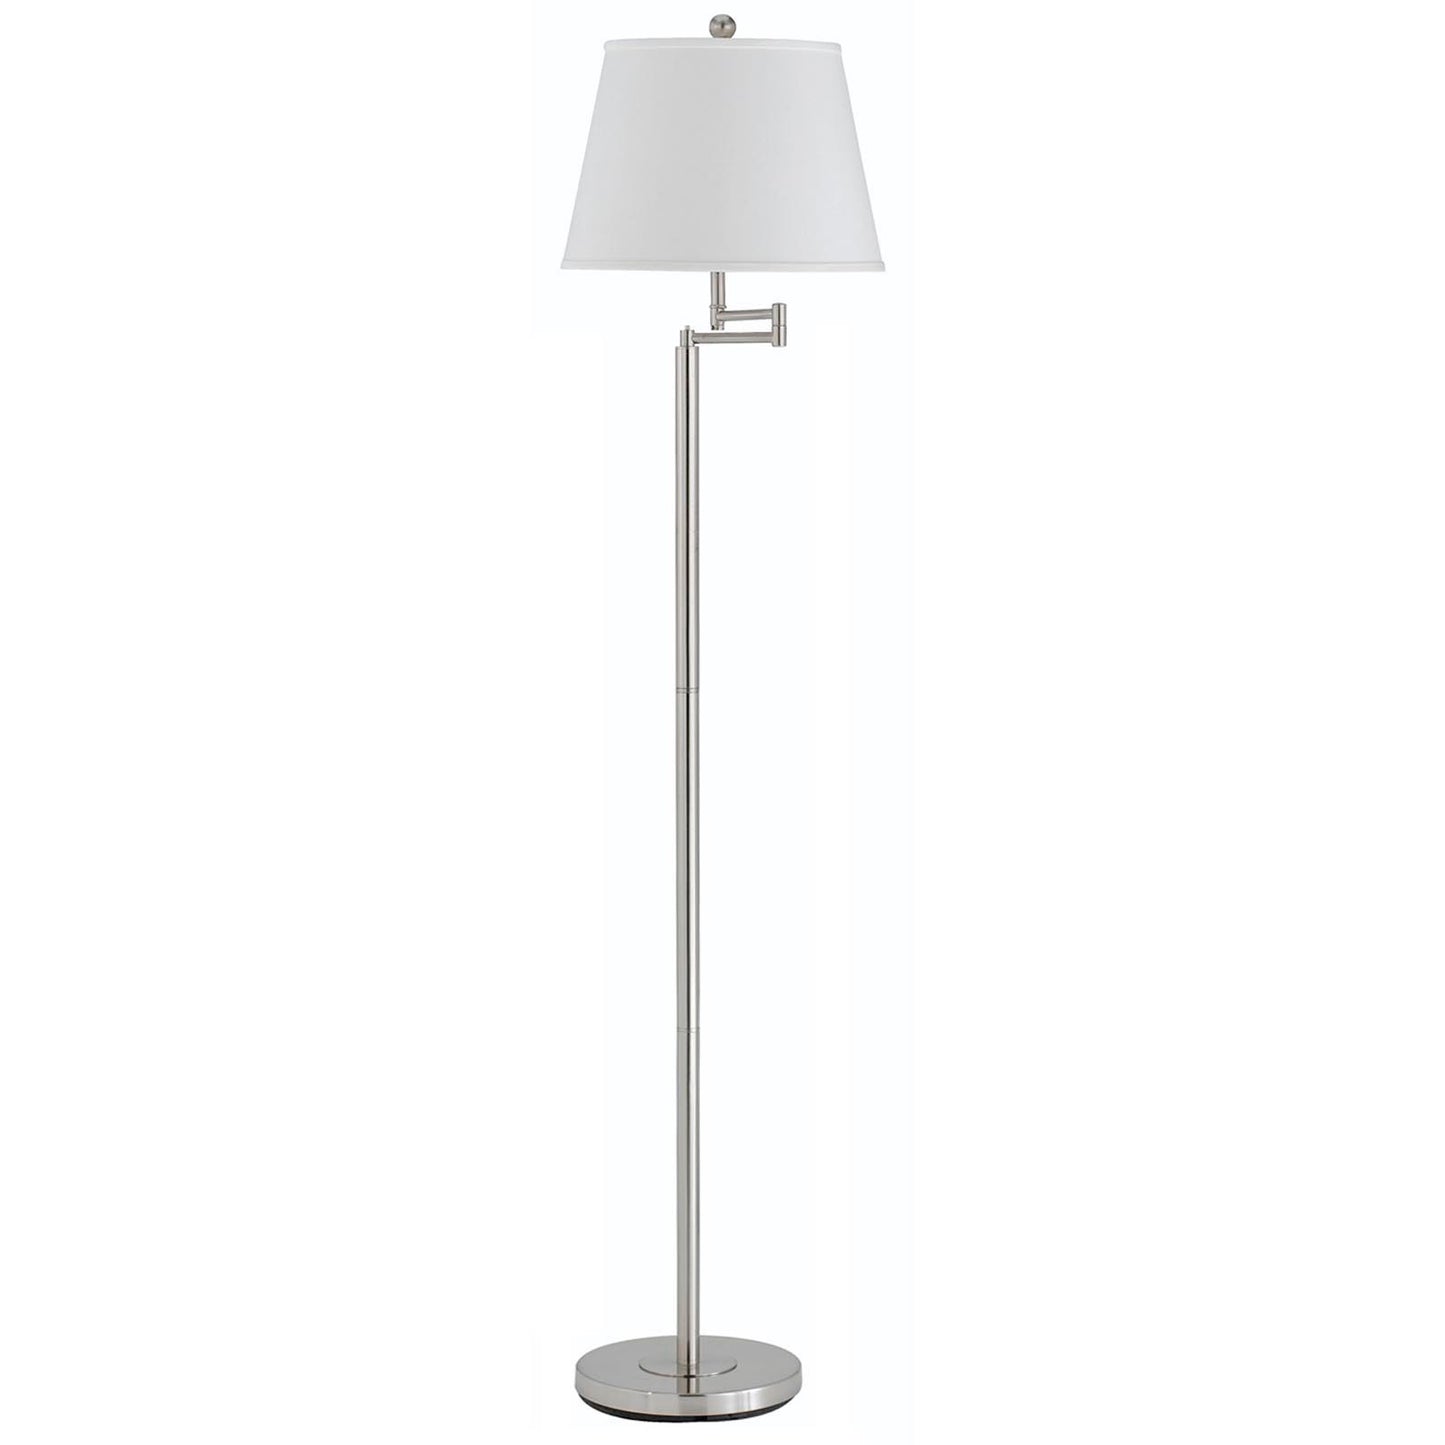 60" Nickel Swing Arm Floor Lamp With White Square Shade